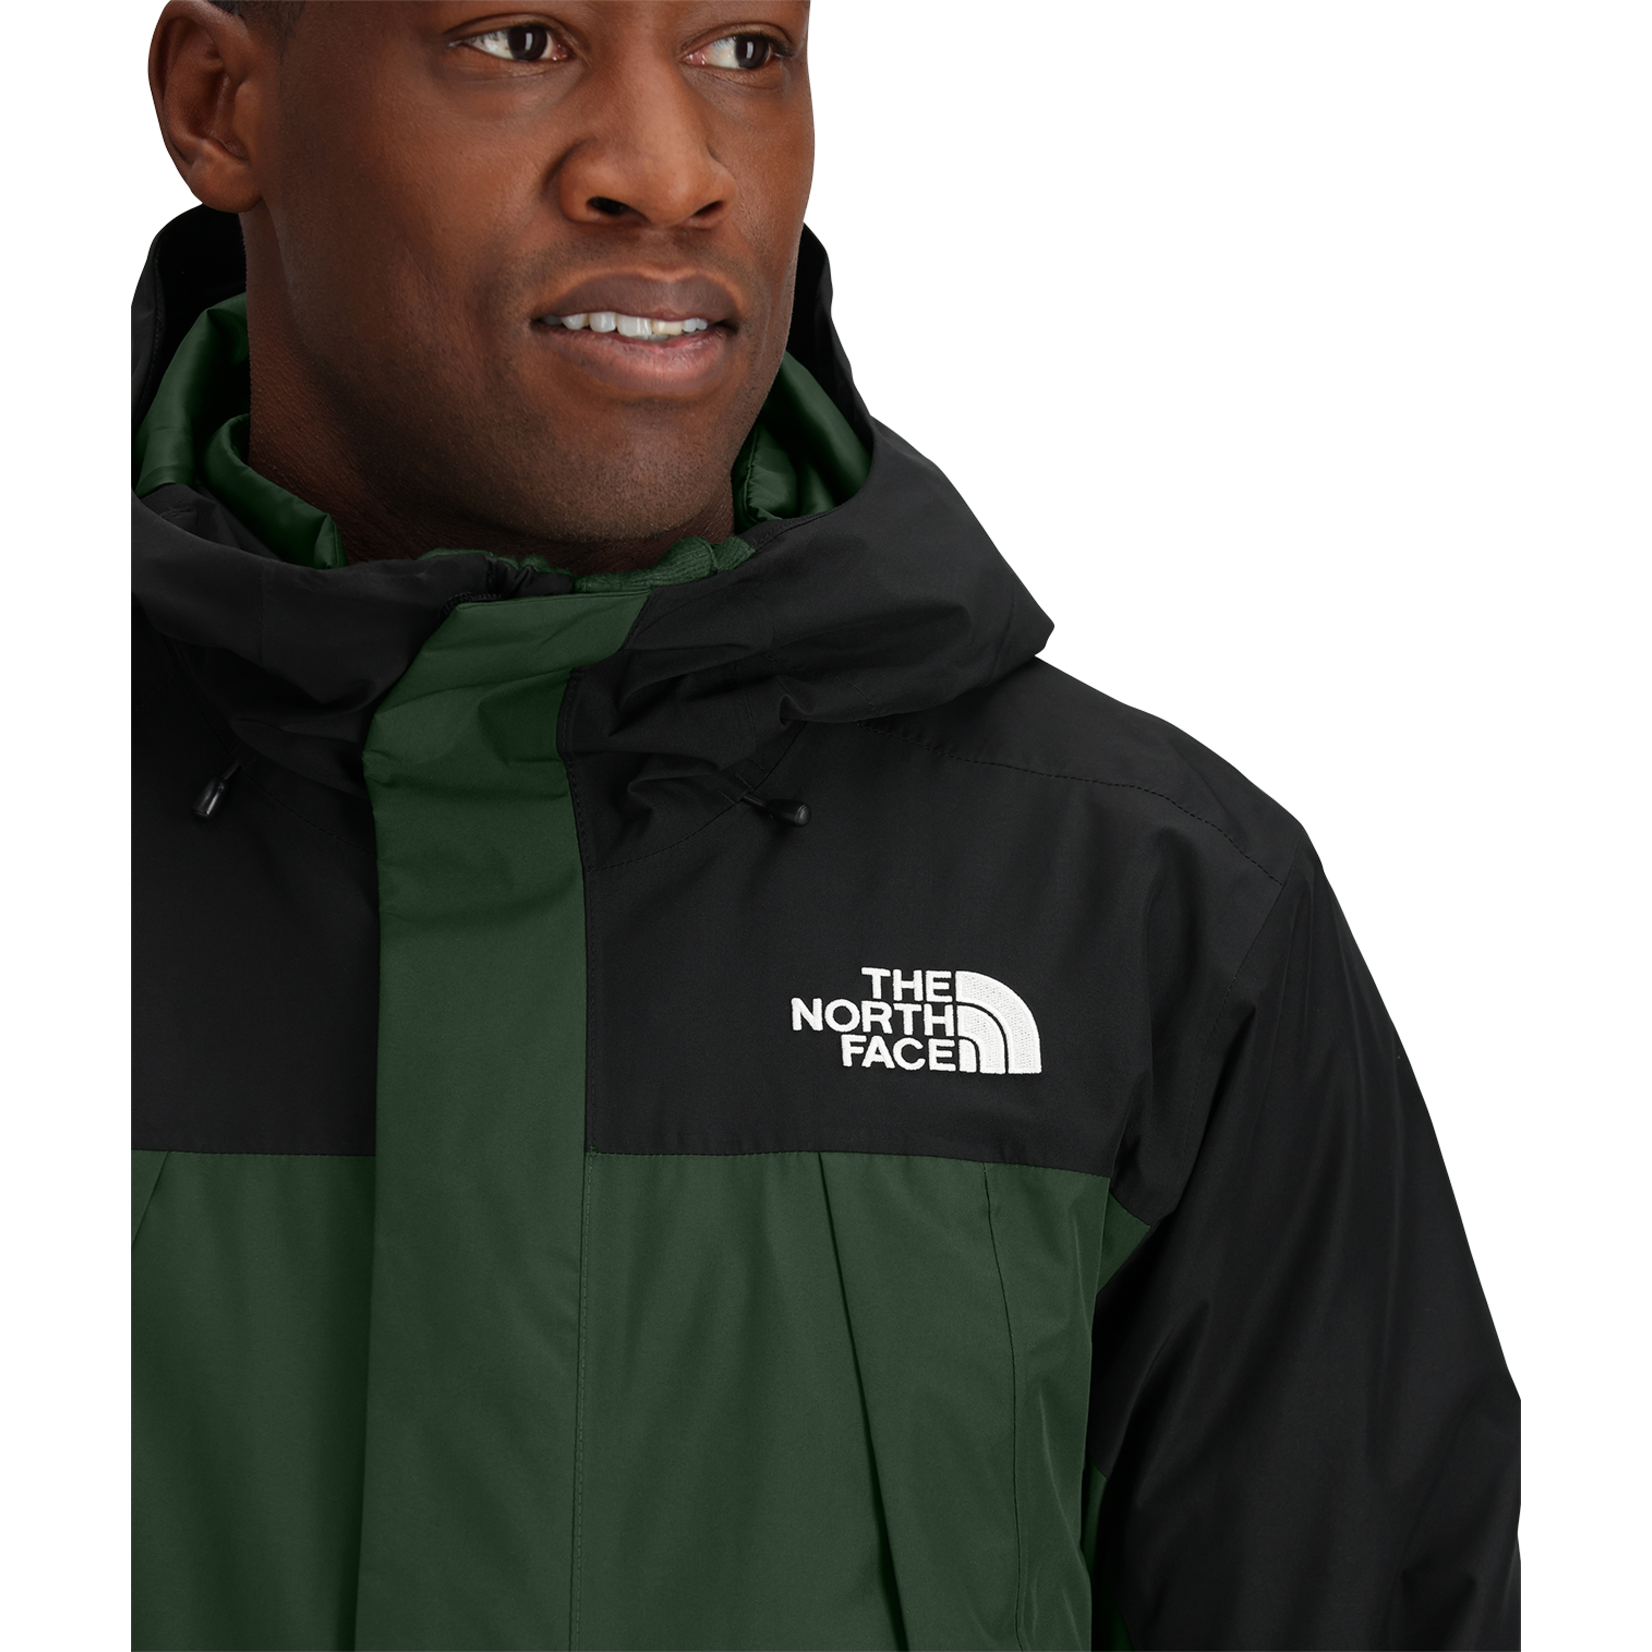 The North Face Men's Clement Triclimate Jacket for Sale